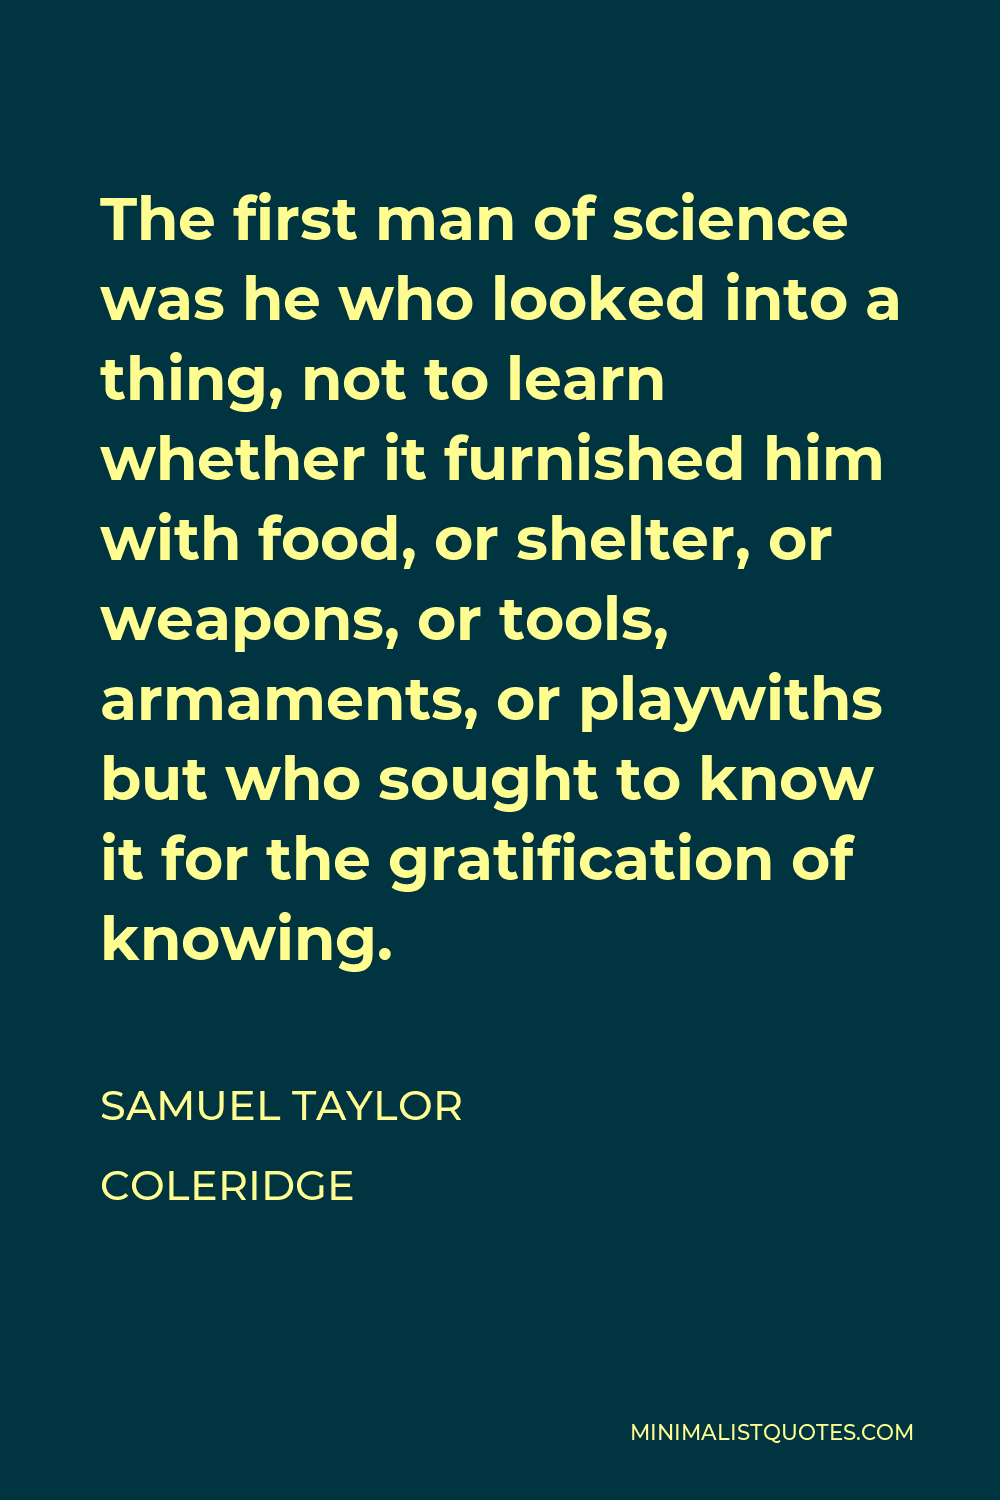 Samuel Taylor Coleridge Quote - The first man of science was he who looked into a thing, not to learn whether it furnished him with food, or shelter, or weapons, or tools, armaments, or playwiths but who sought to know it for the gratification of knowing.